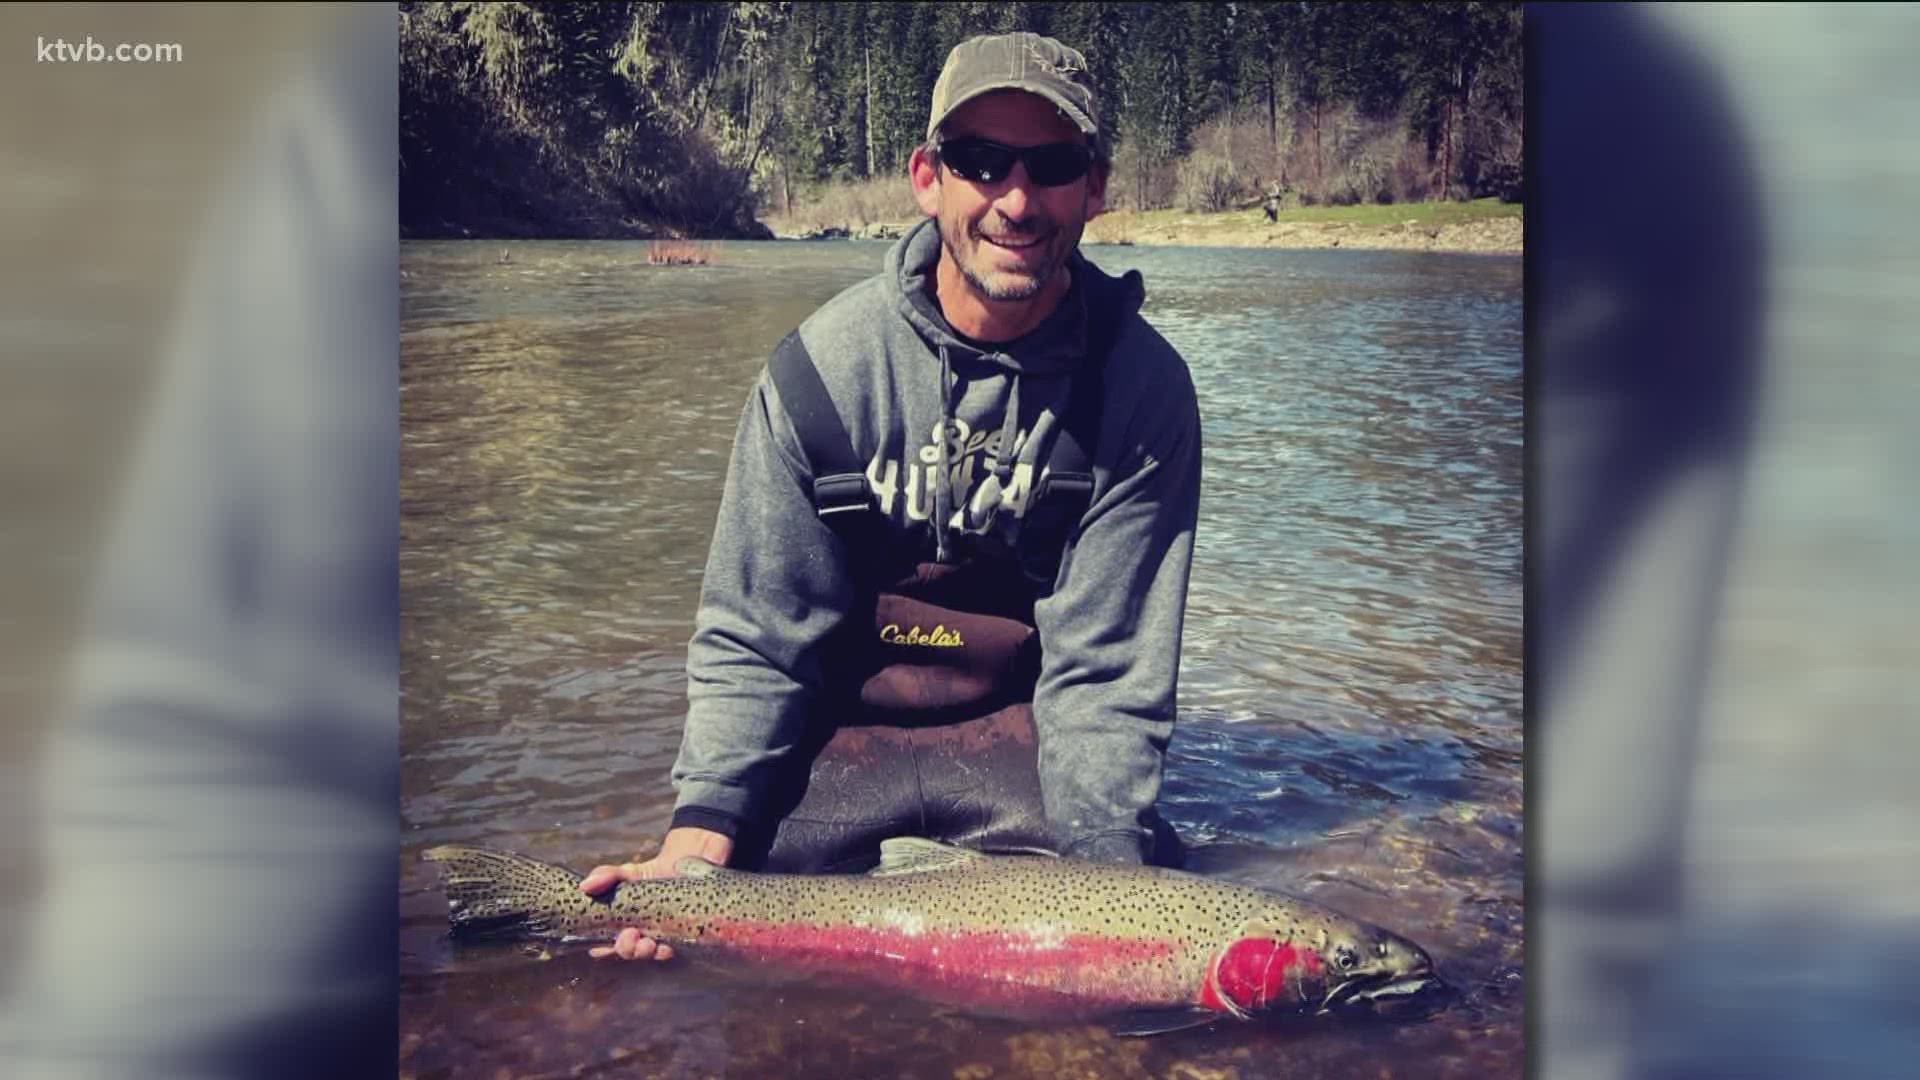 The man caught the catch-and-release state record trout on April 11.